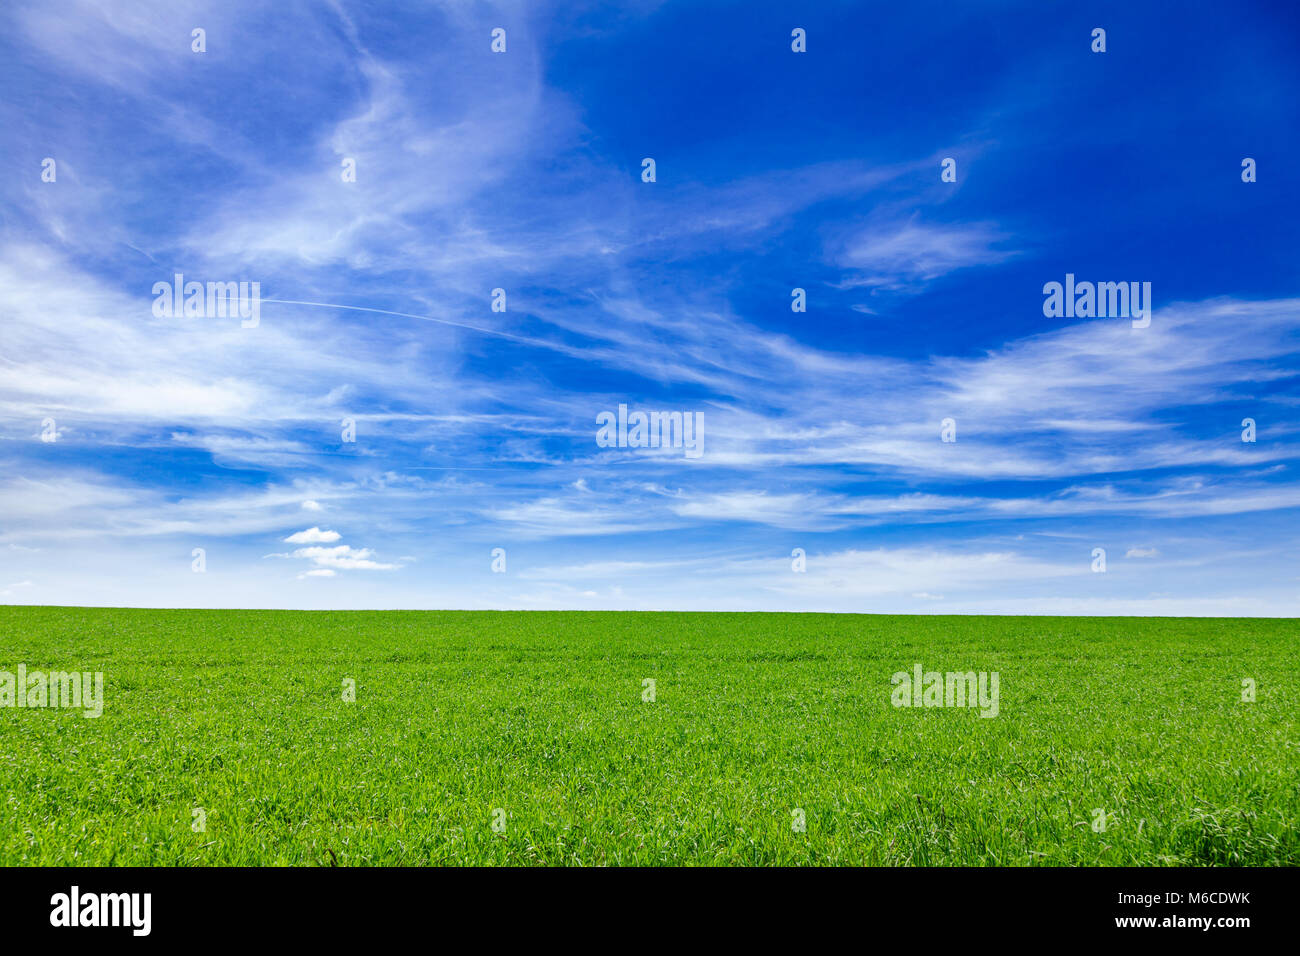 Idyllic english rural landscape with scenic green field under a blue summer sky in Southern England UK Stock Photo